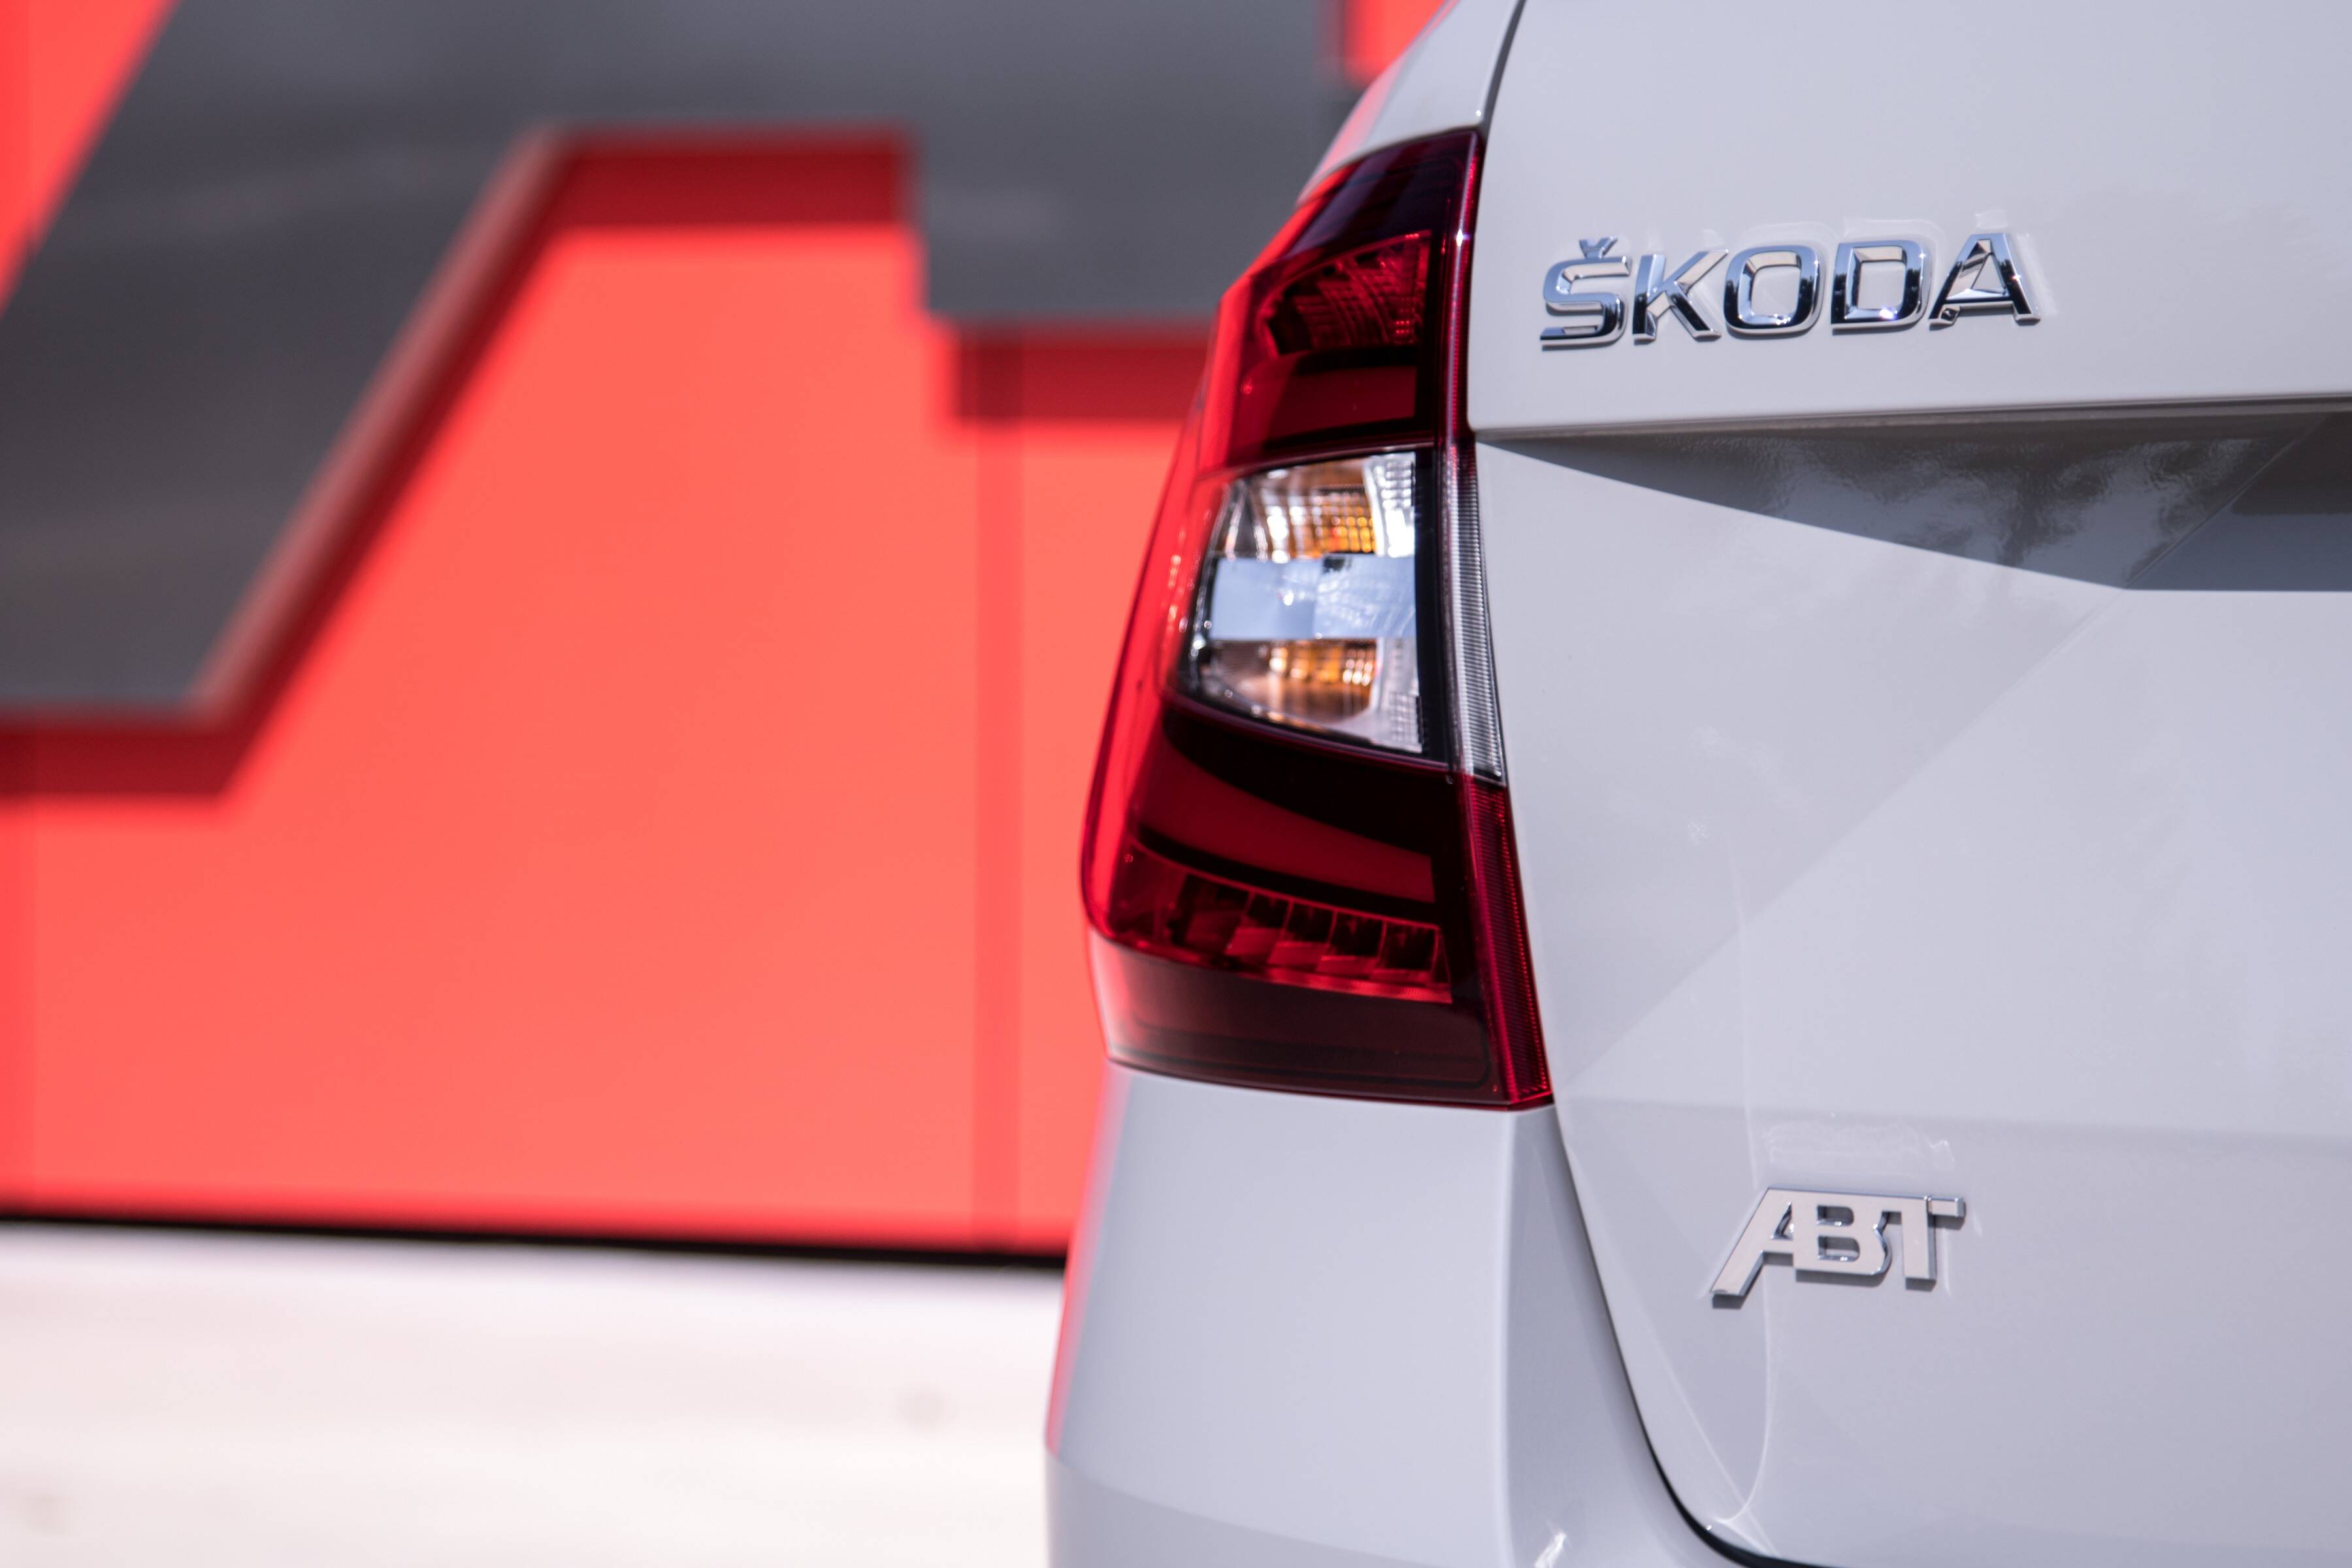 ABT equips the Skoda Octavia with 315 HP and other performance